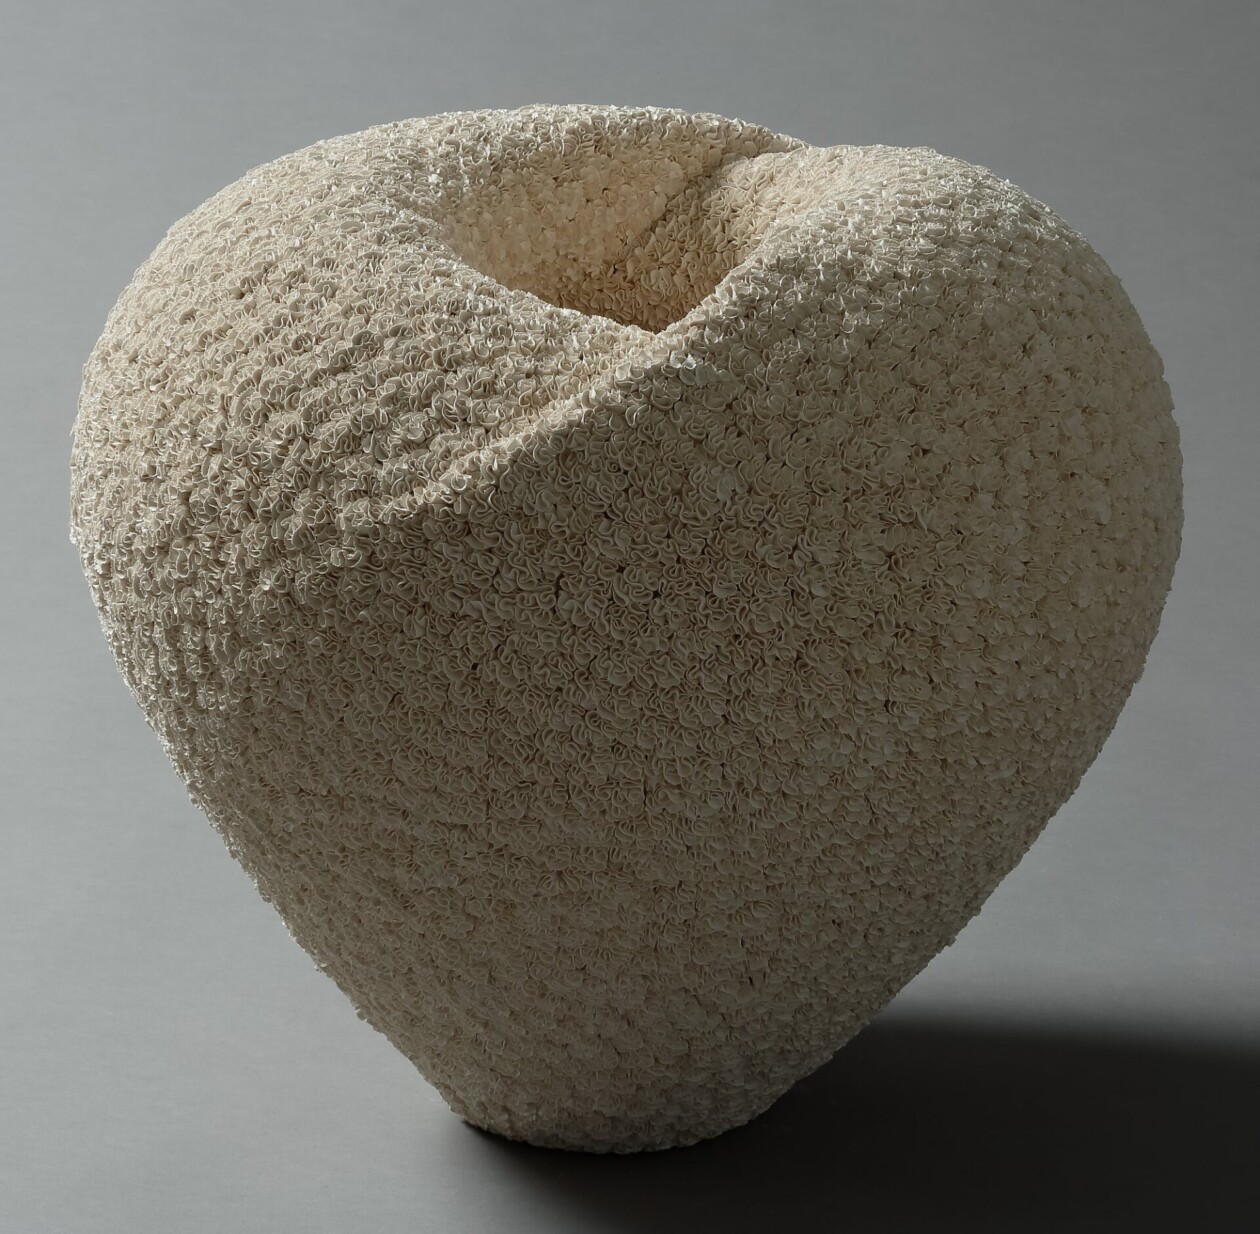 Intricately Coiled Porcelain Sculptures By Hattori Makiko (8)